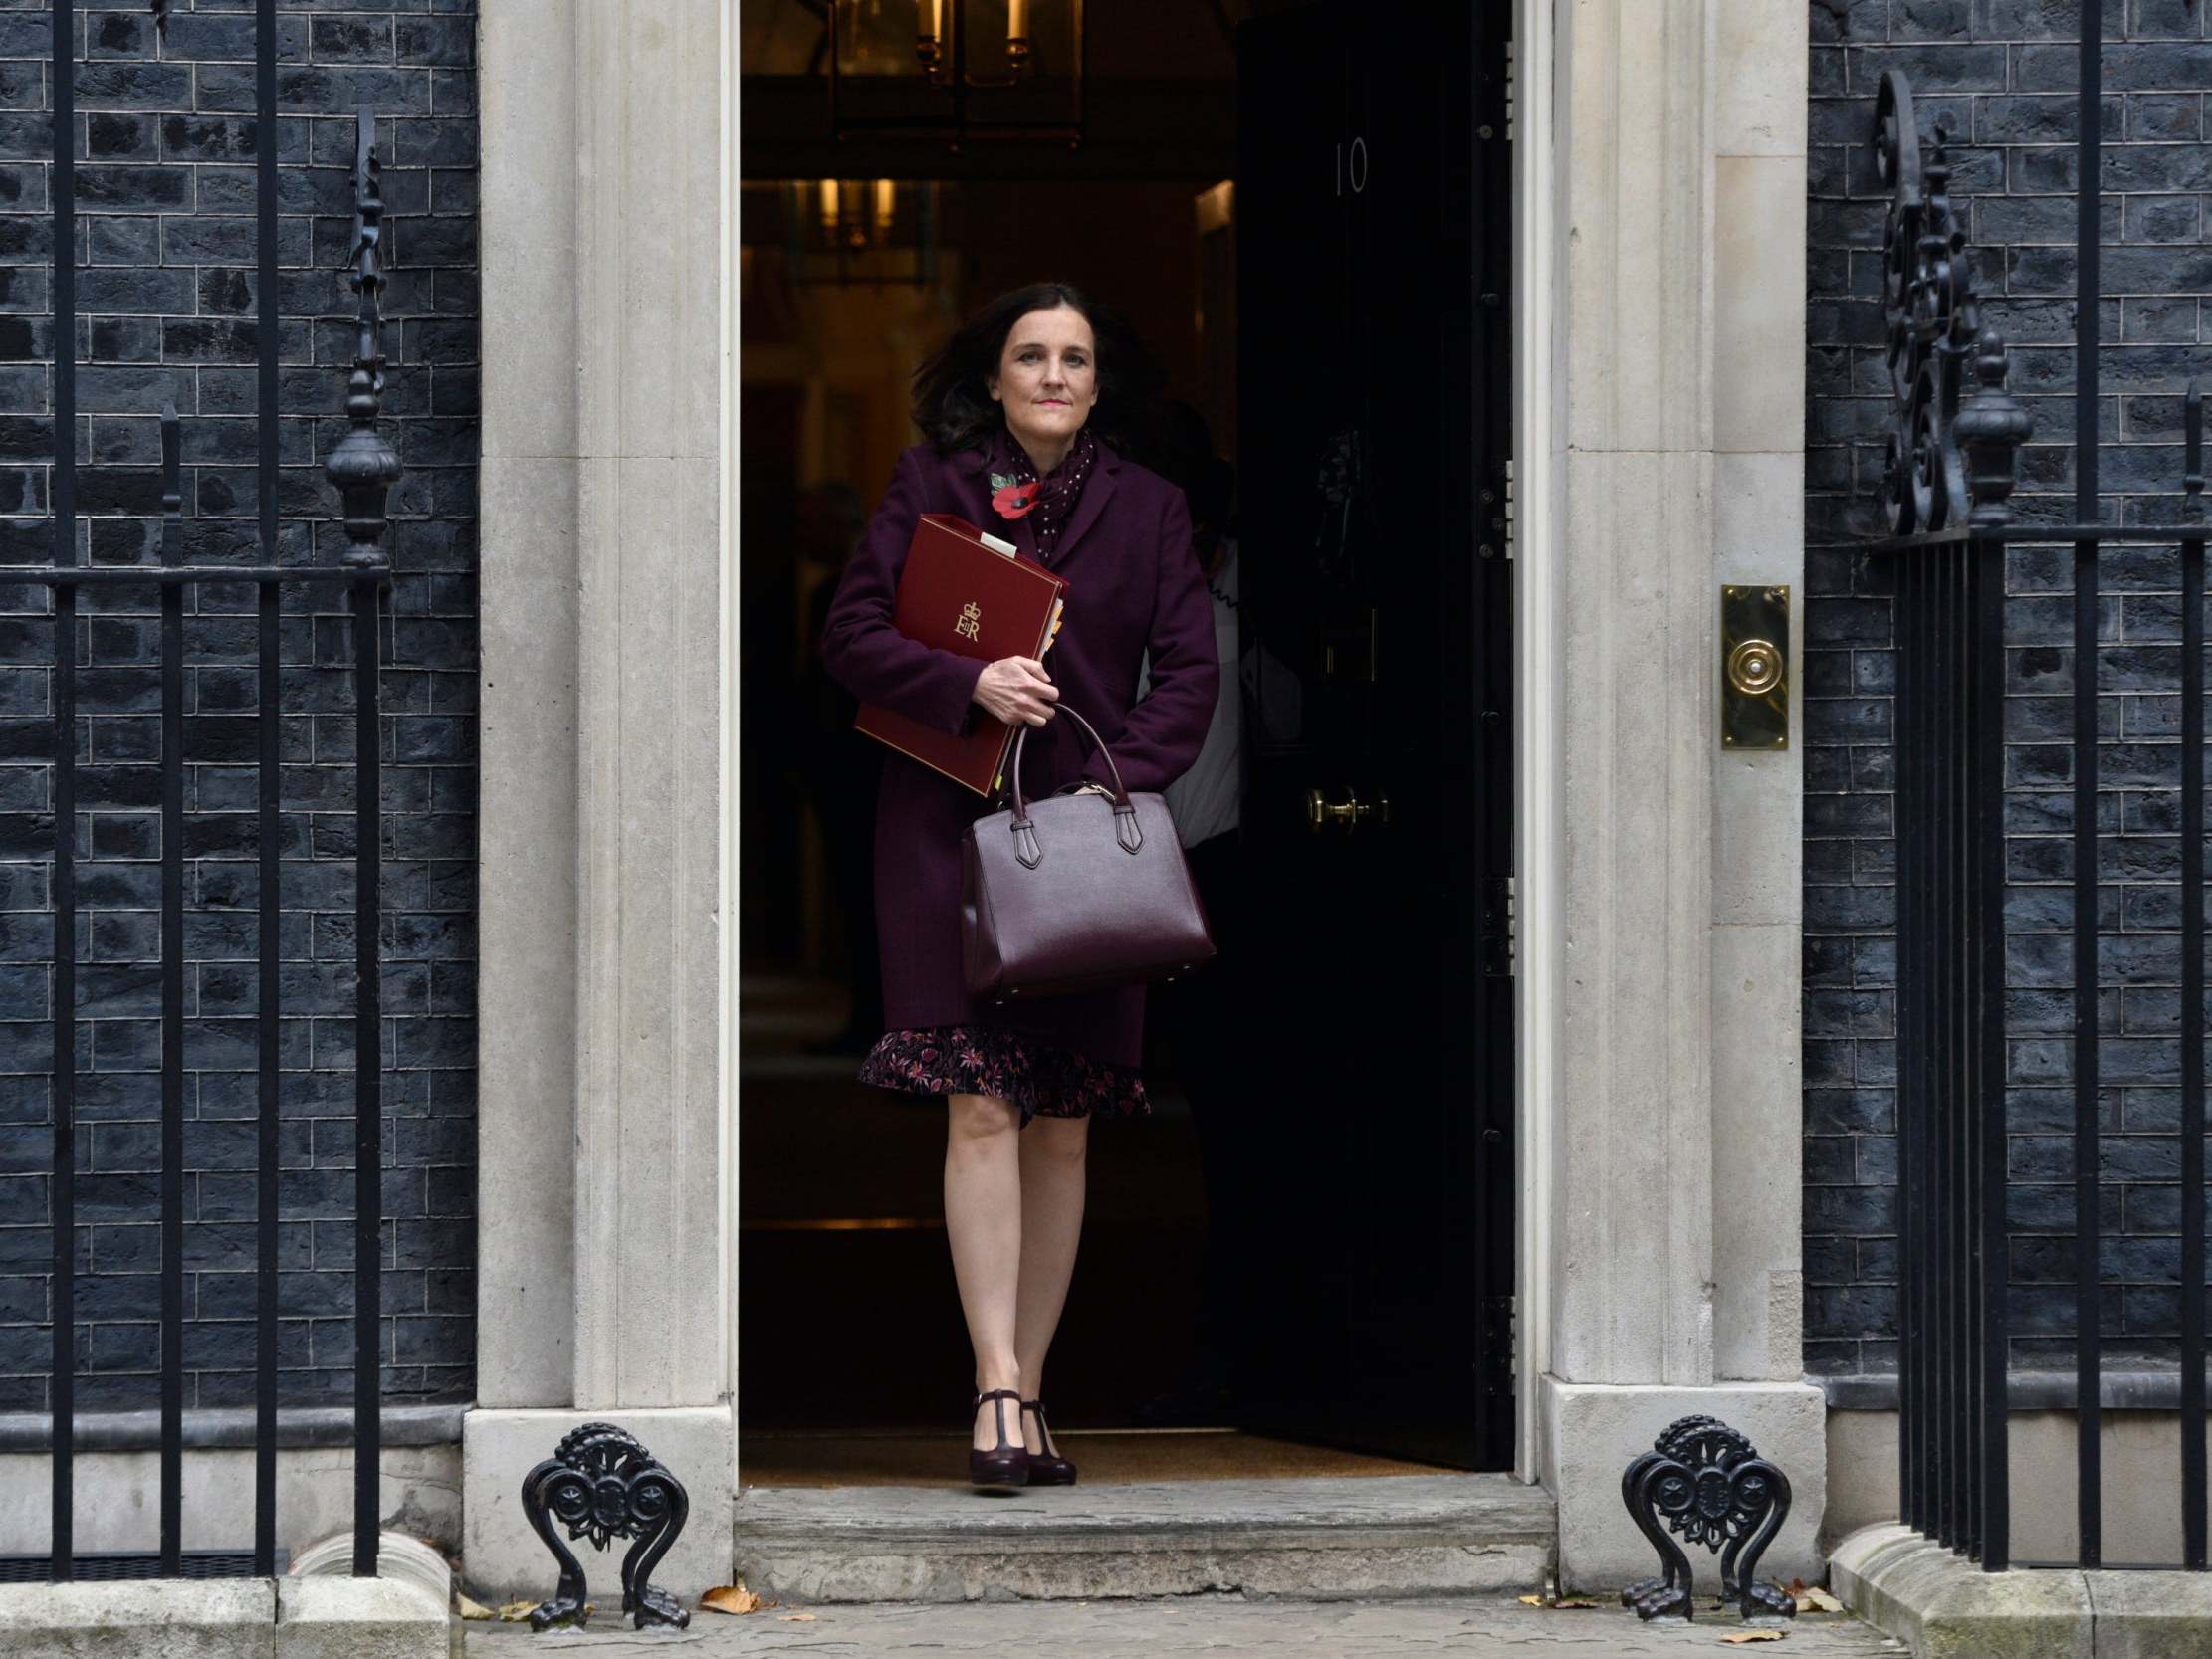 A Labour gain in Theresa Villiers' Chipping Barnet seat could mean curtains for Boris Johnson’s premiership